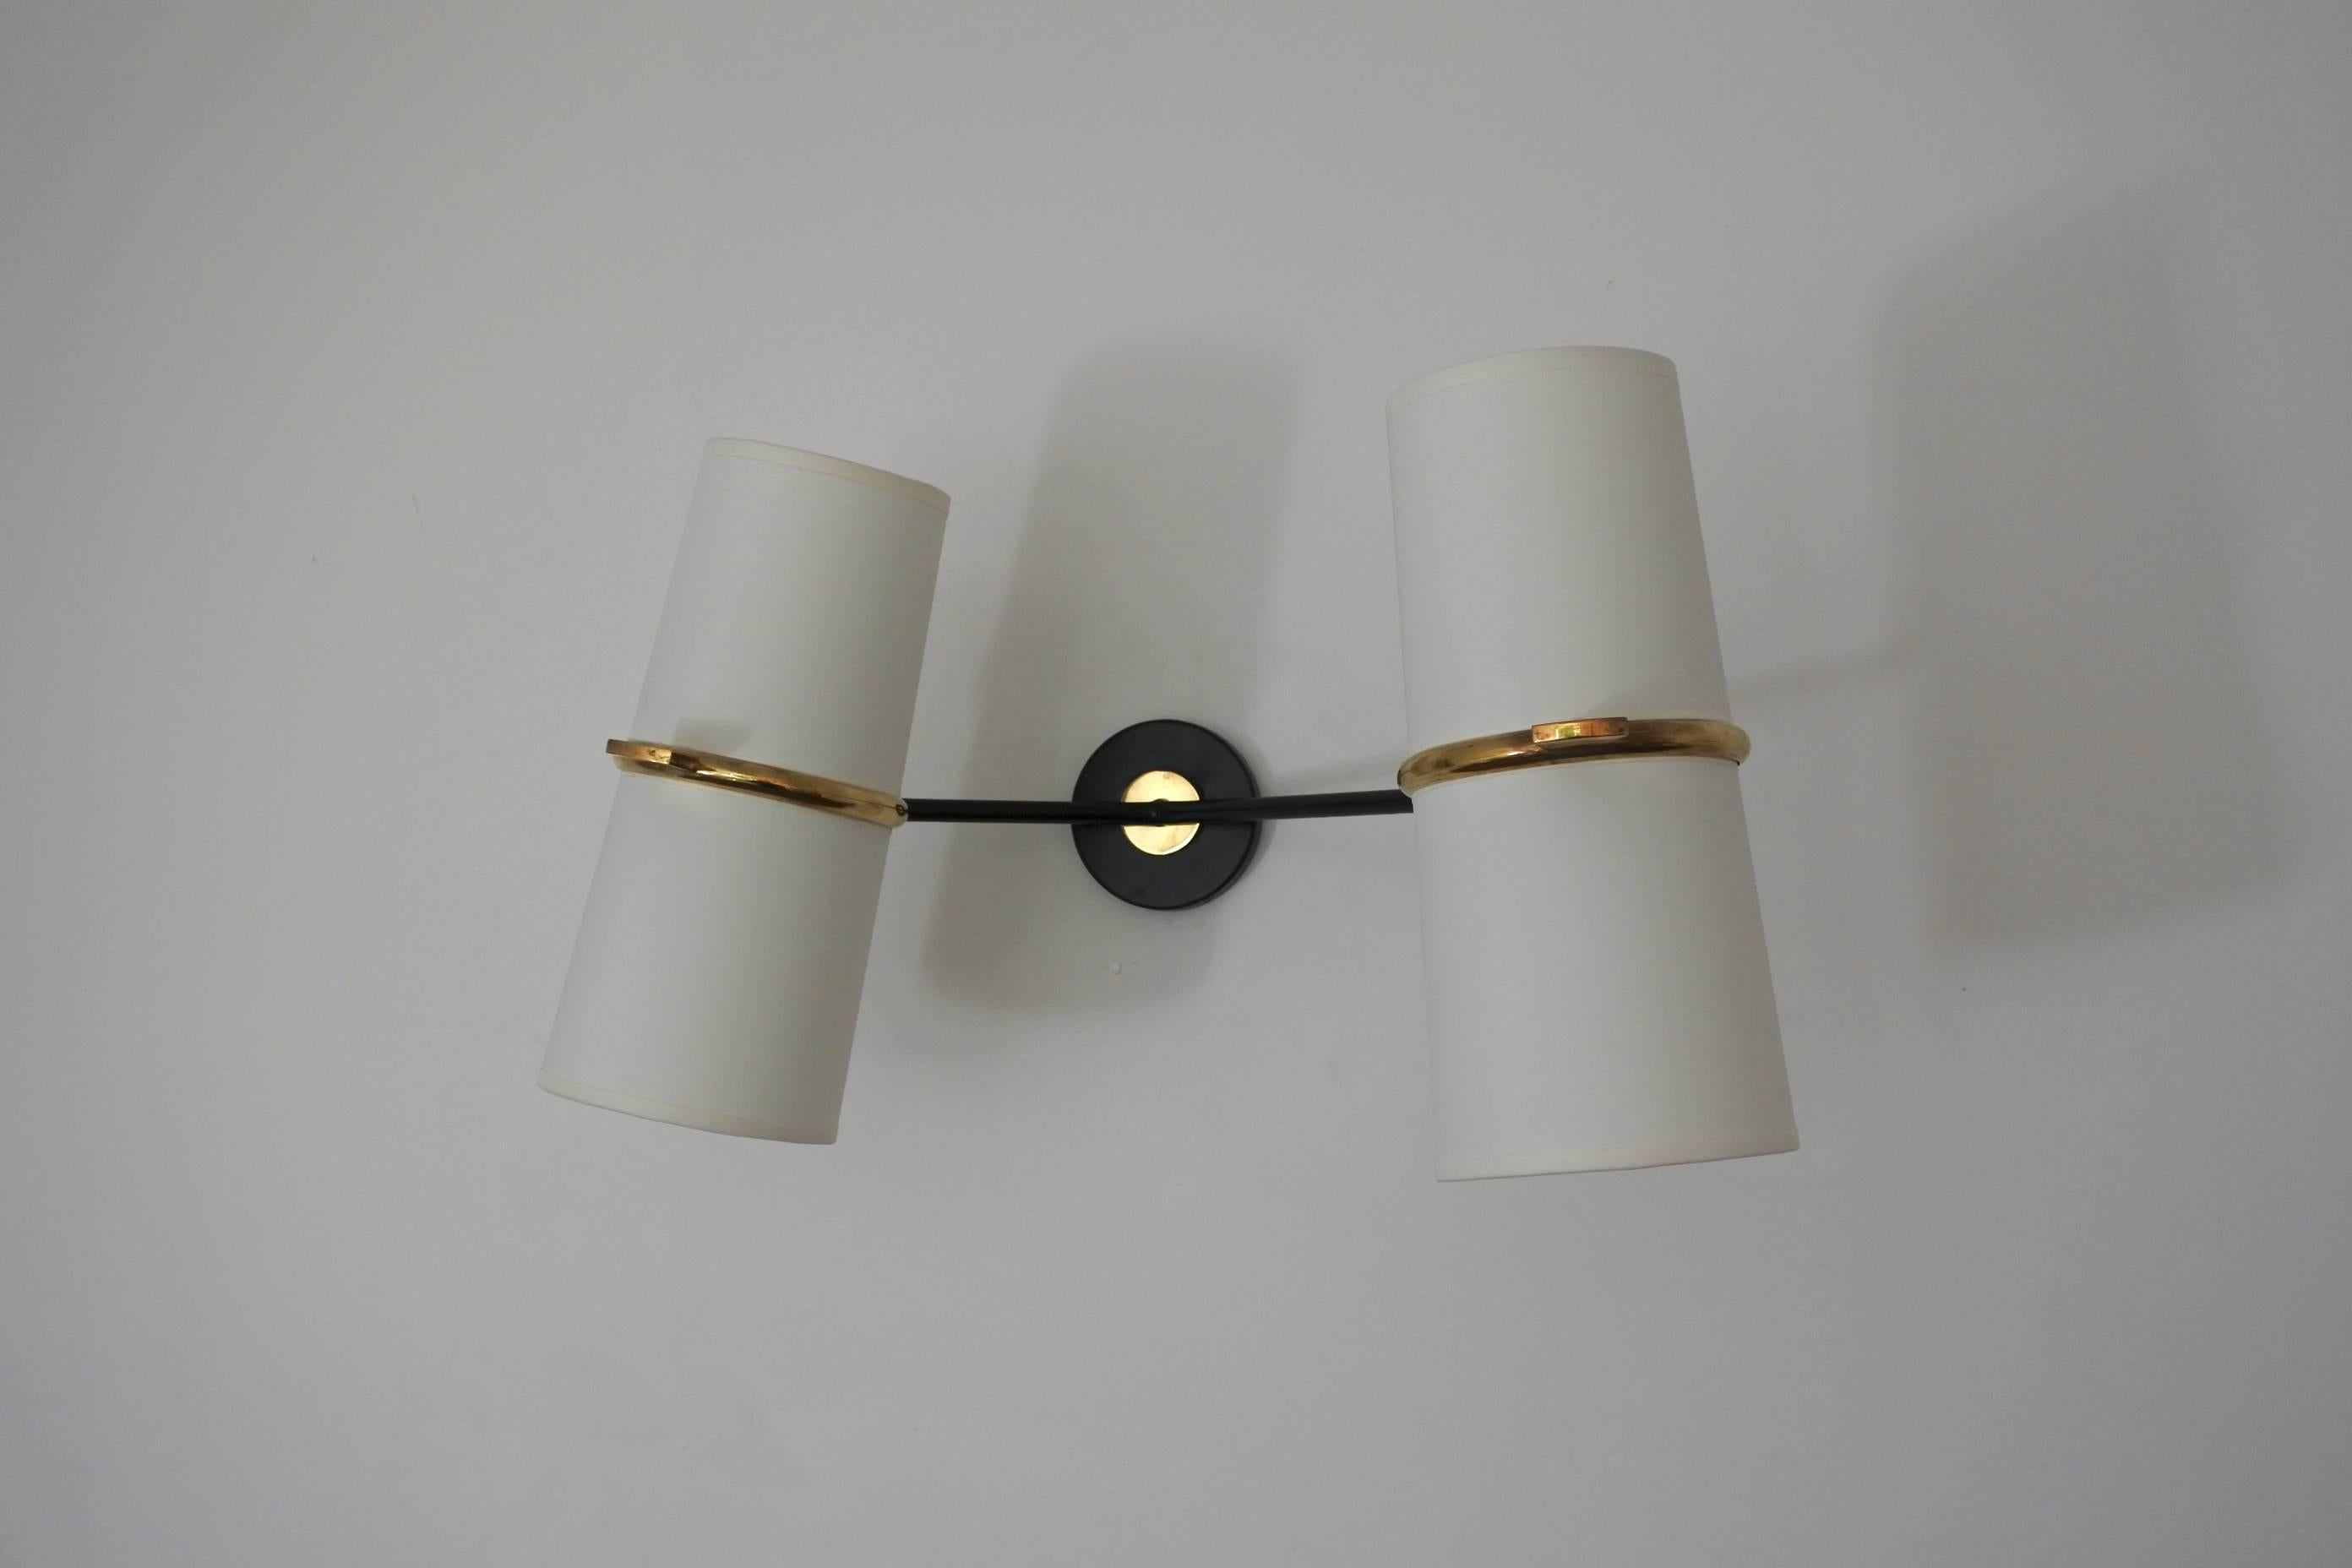 French Midcentury Asymmetrical Wall Lamp by Lunel, France, 1950s